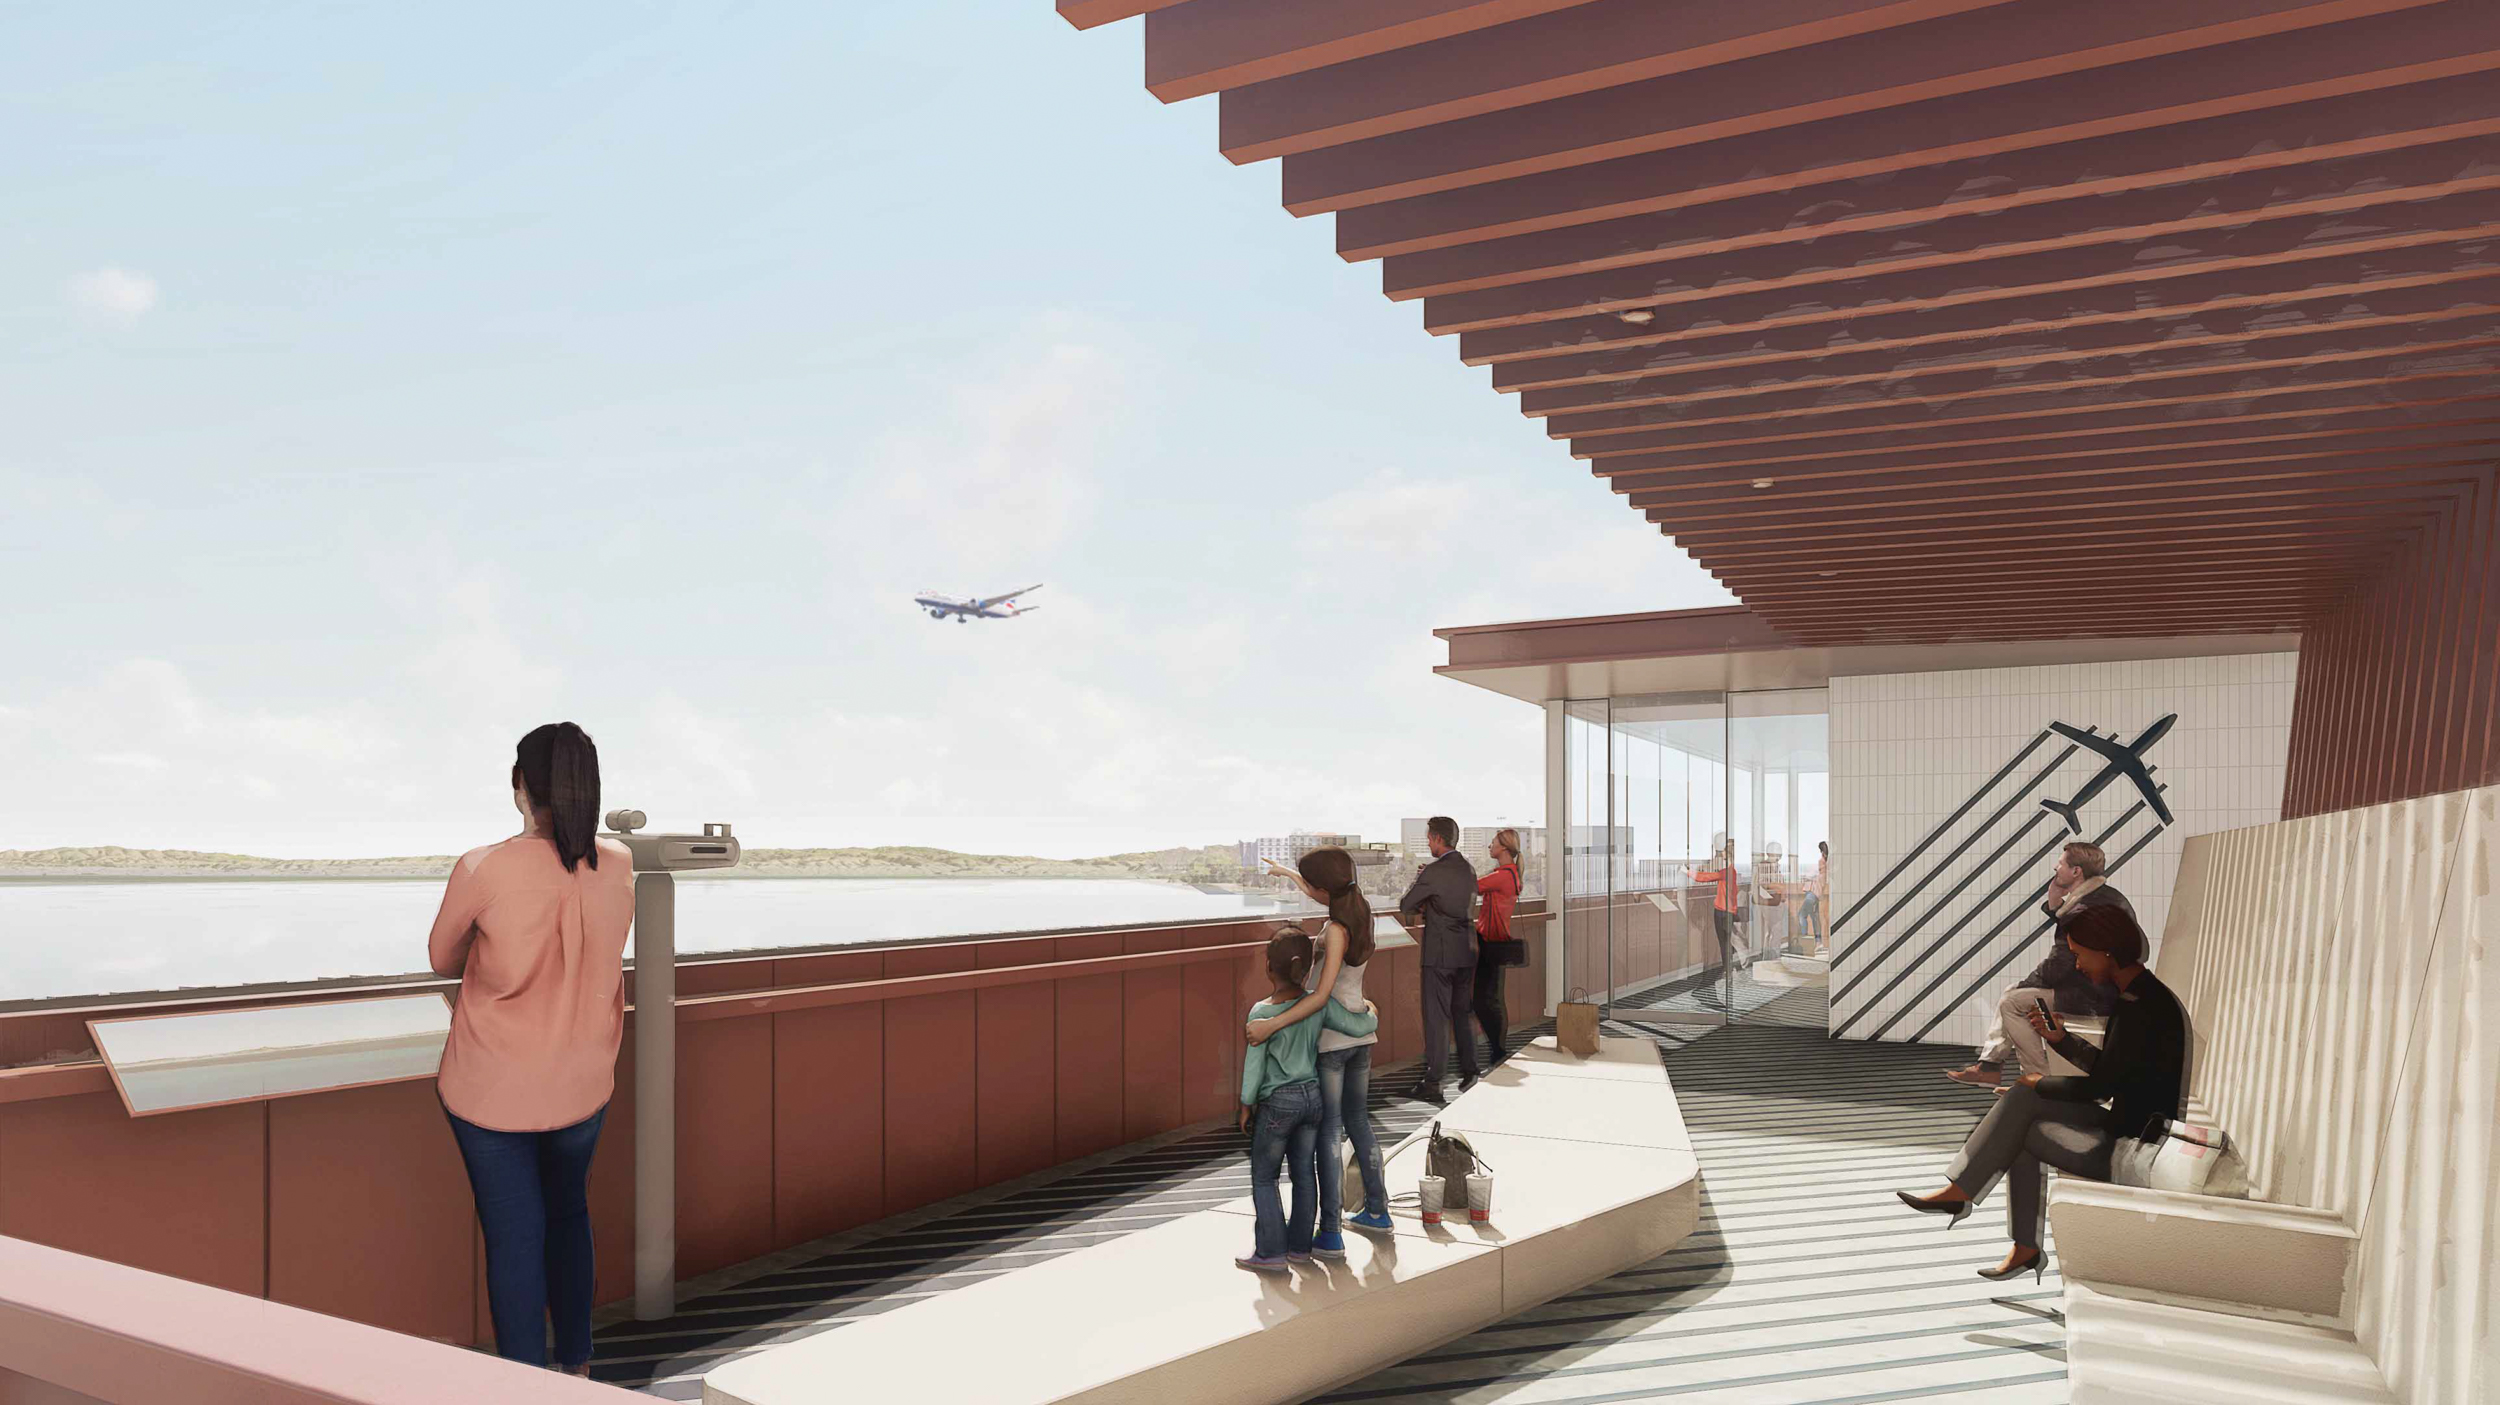 Peninsula Crossing airplane viewing platform from the top of South Parking, rendering by WRNS Studio